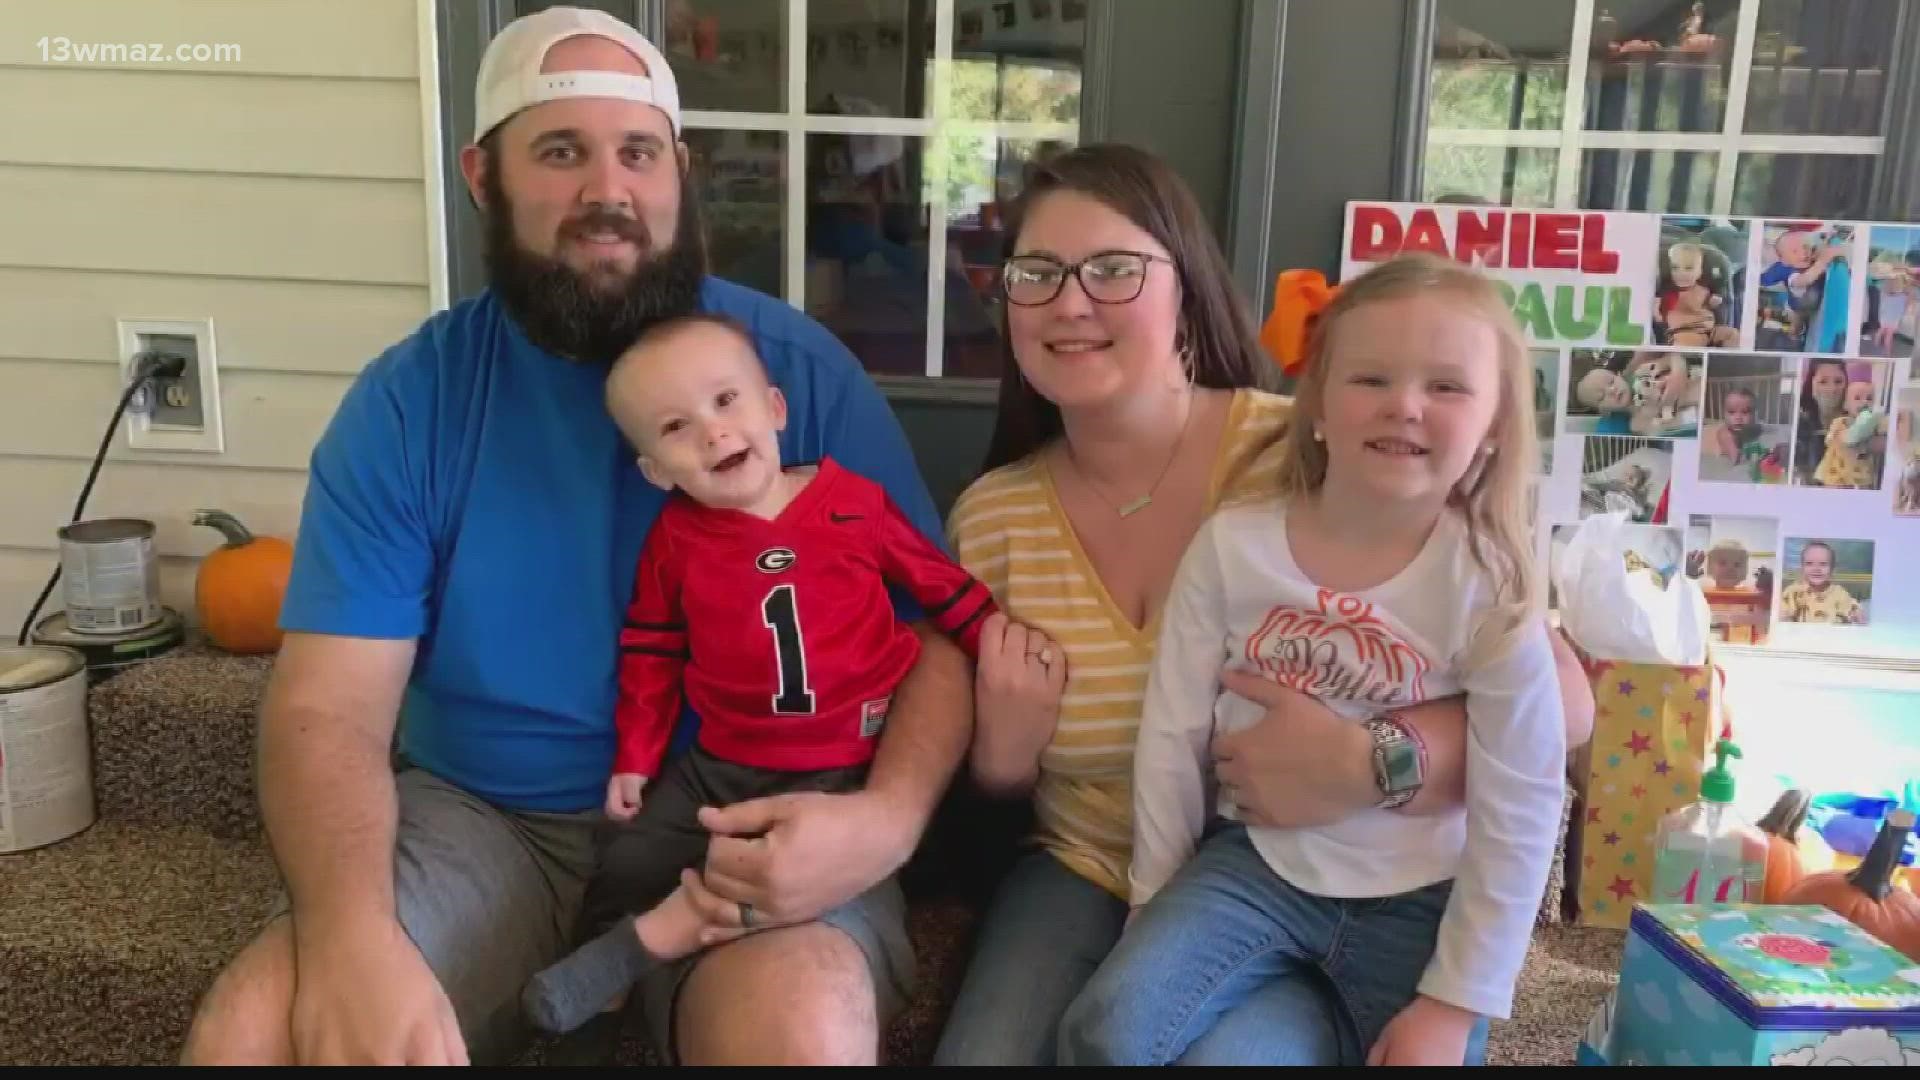 A classic car club needs your help raising money for the medical expenses of a Jones County toddler.